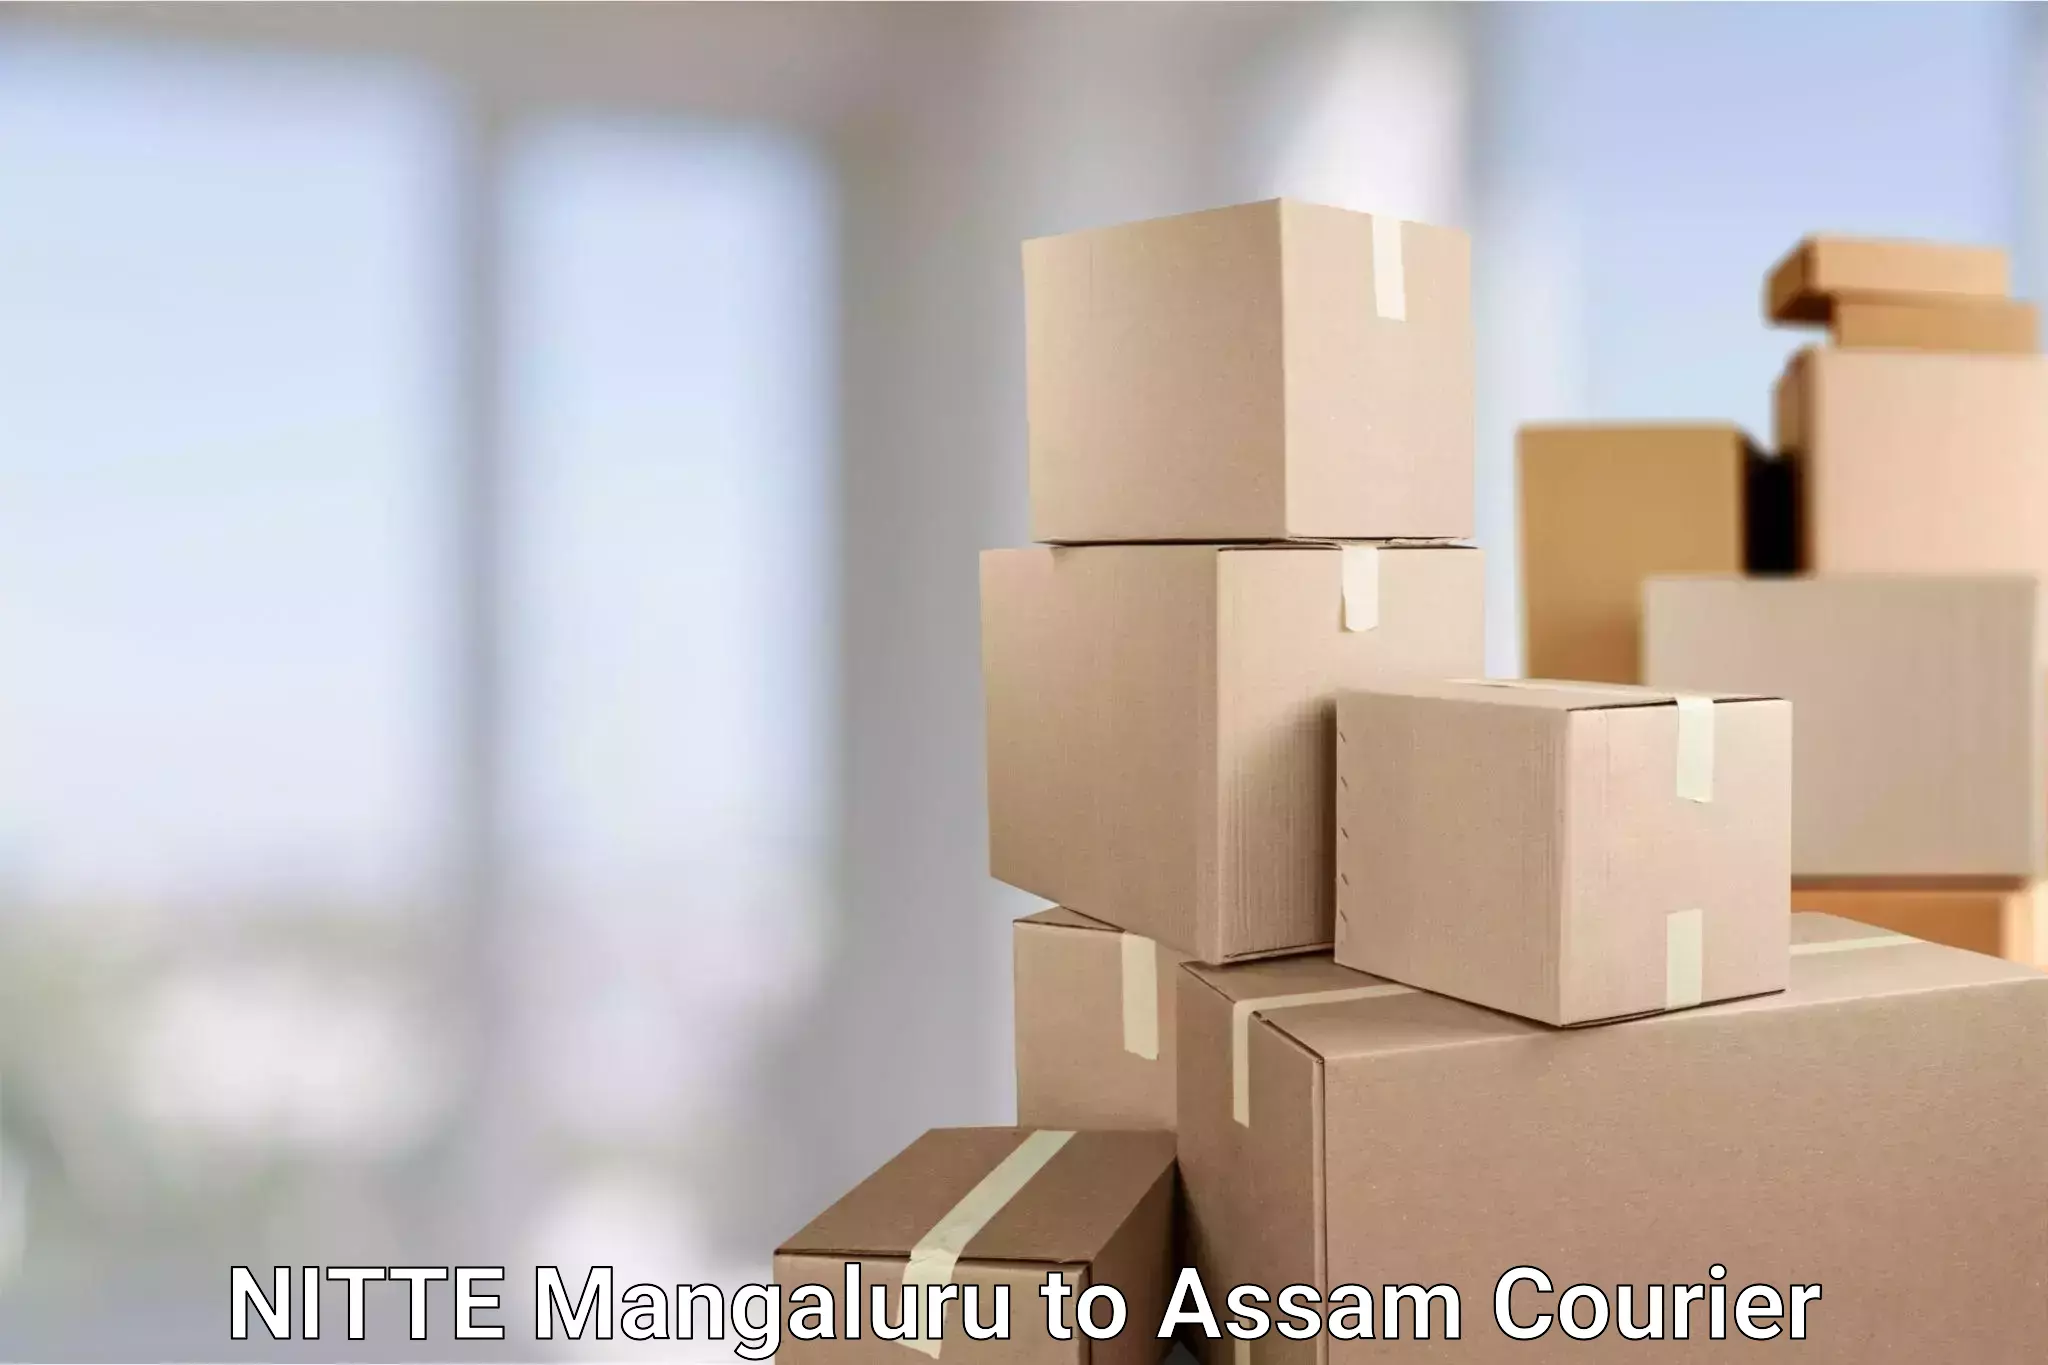 State-of-the-art courier technology NITTE Mangaluru to Agomani